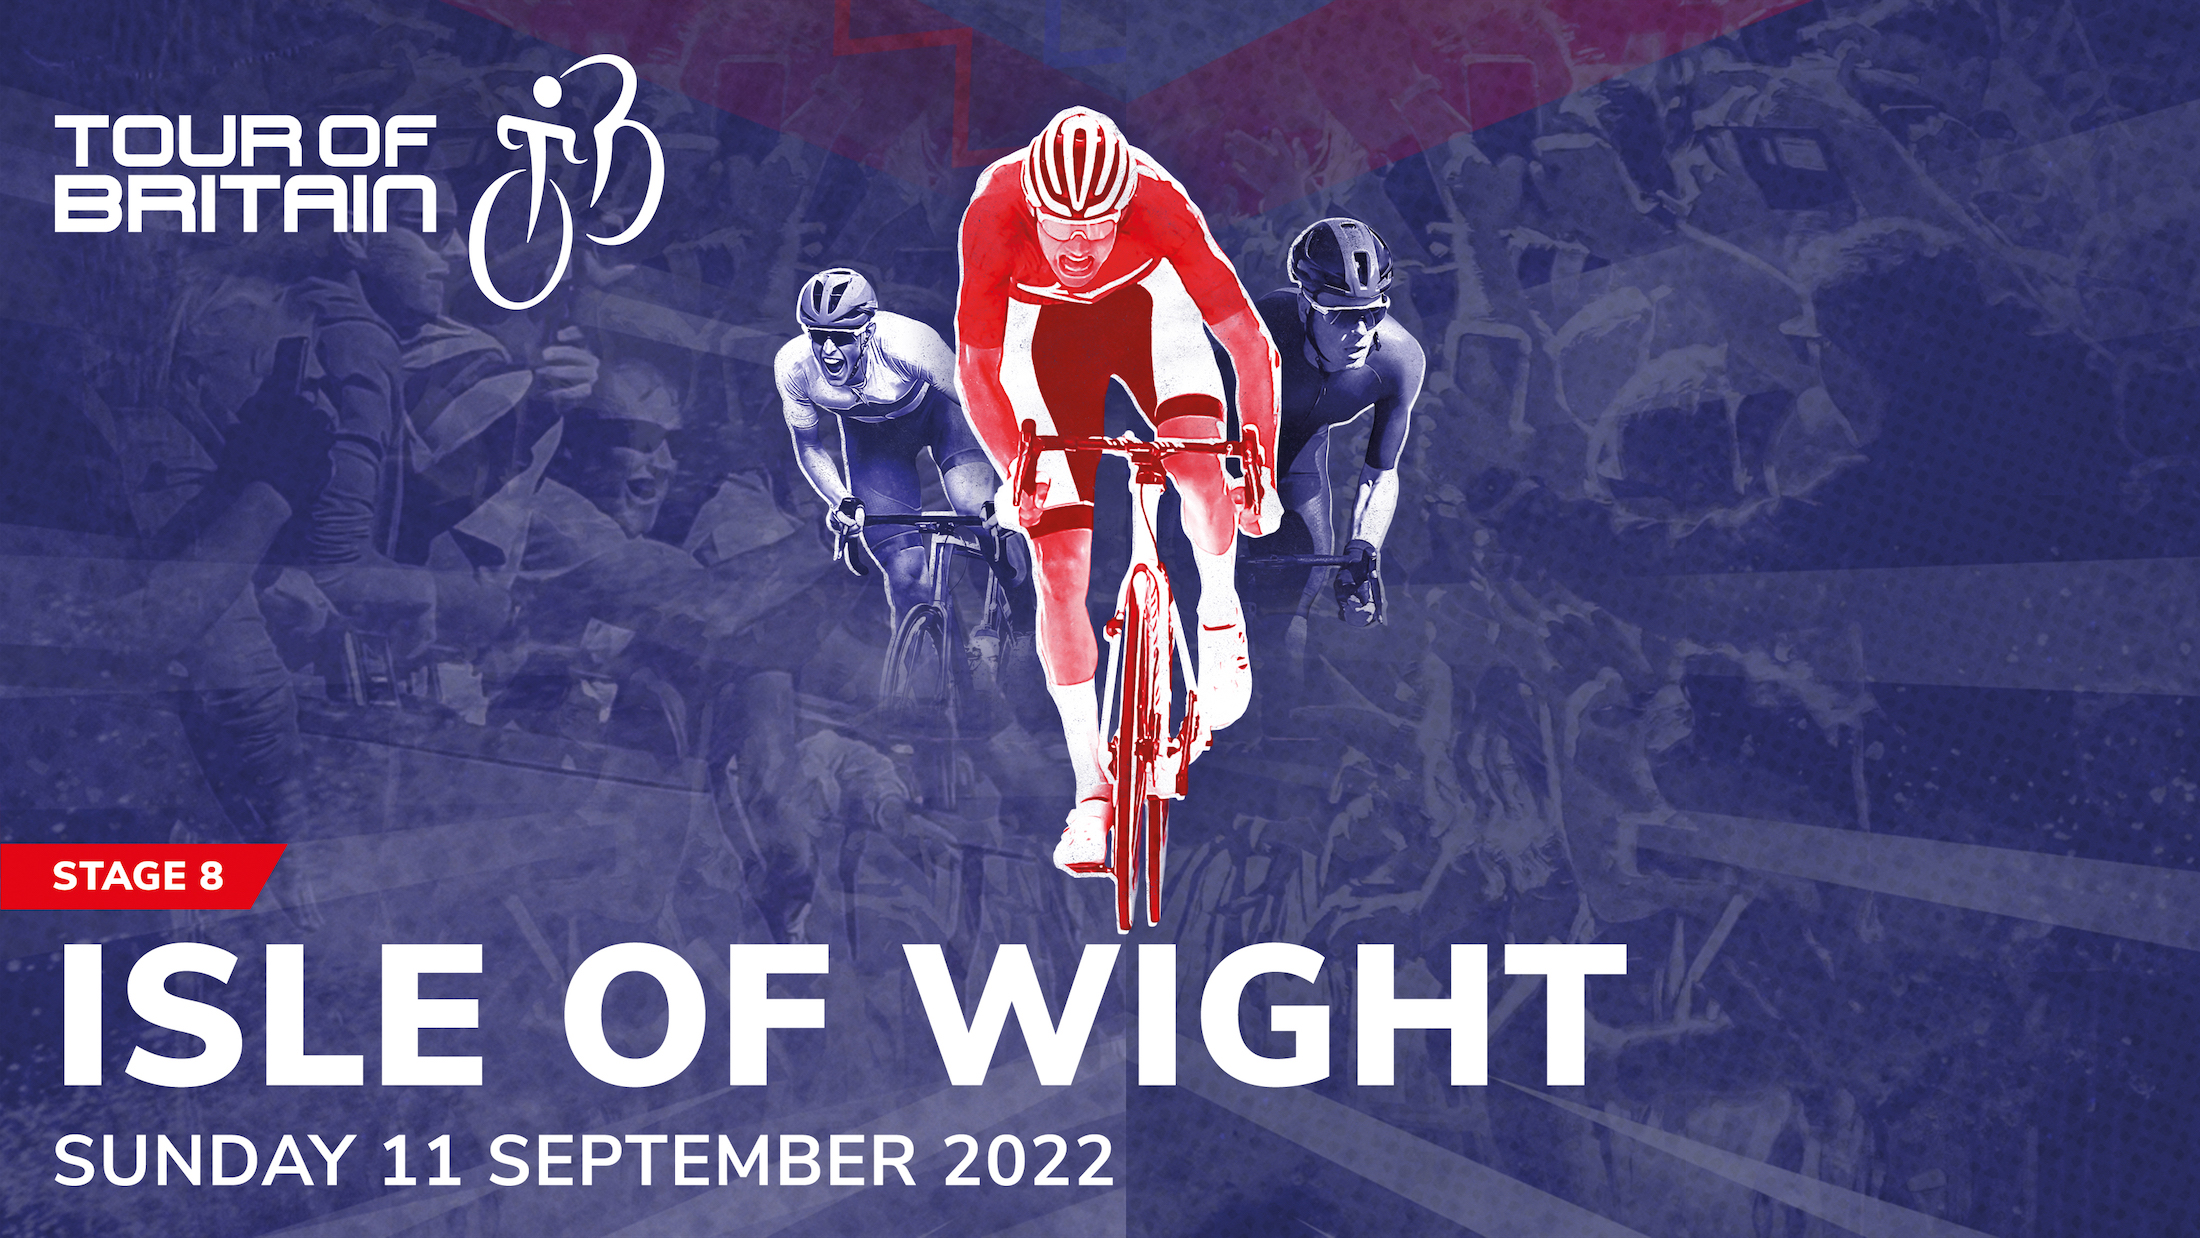 Poster showing cyclists, Tour of Britain logo and Isle of Wight date Sunday 11 September 2022